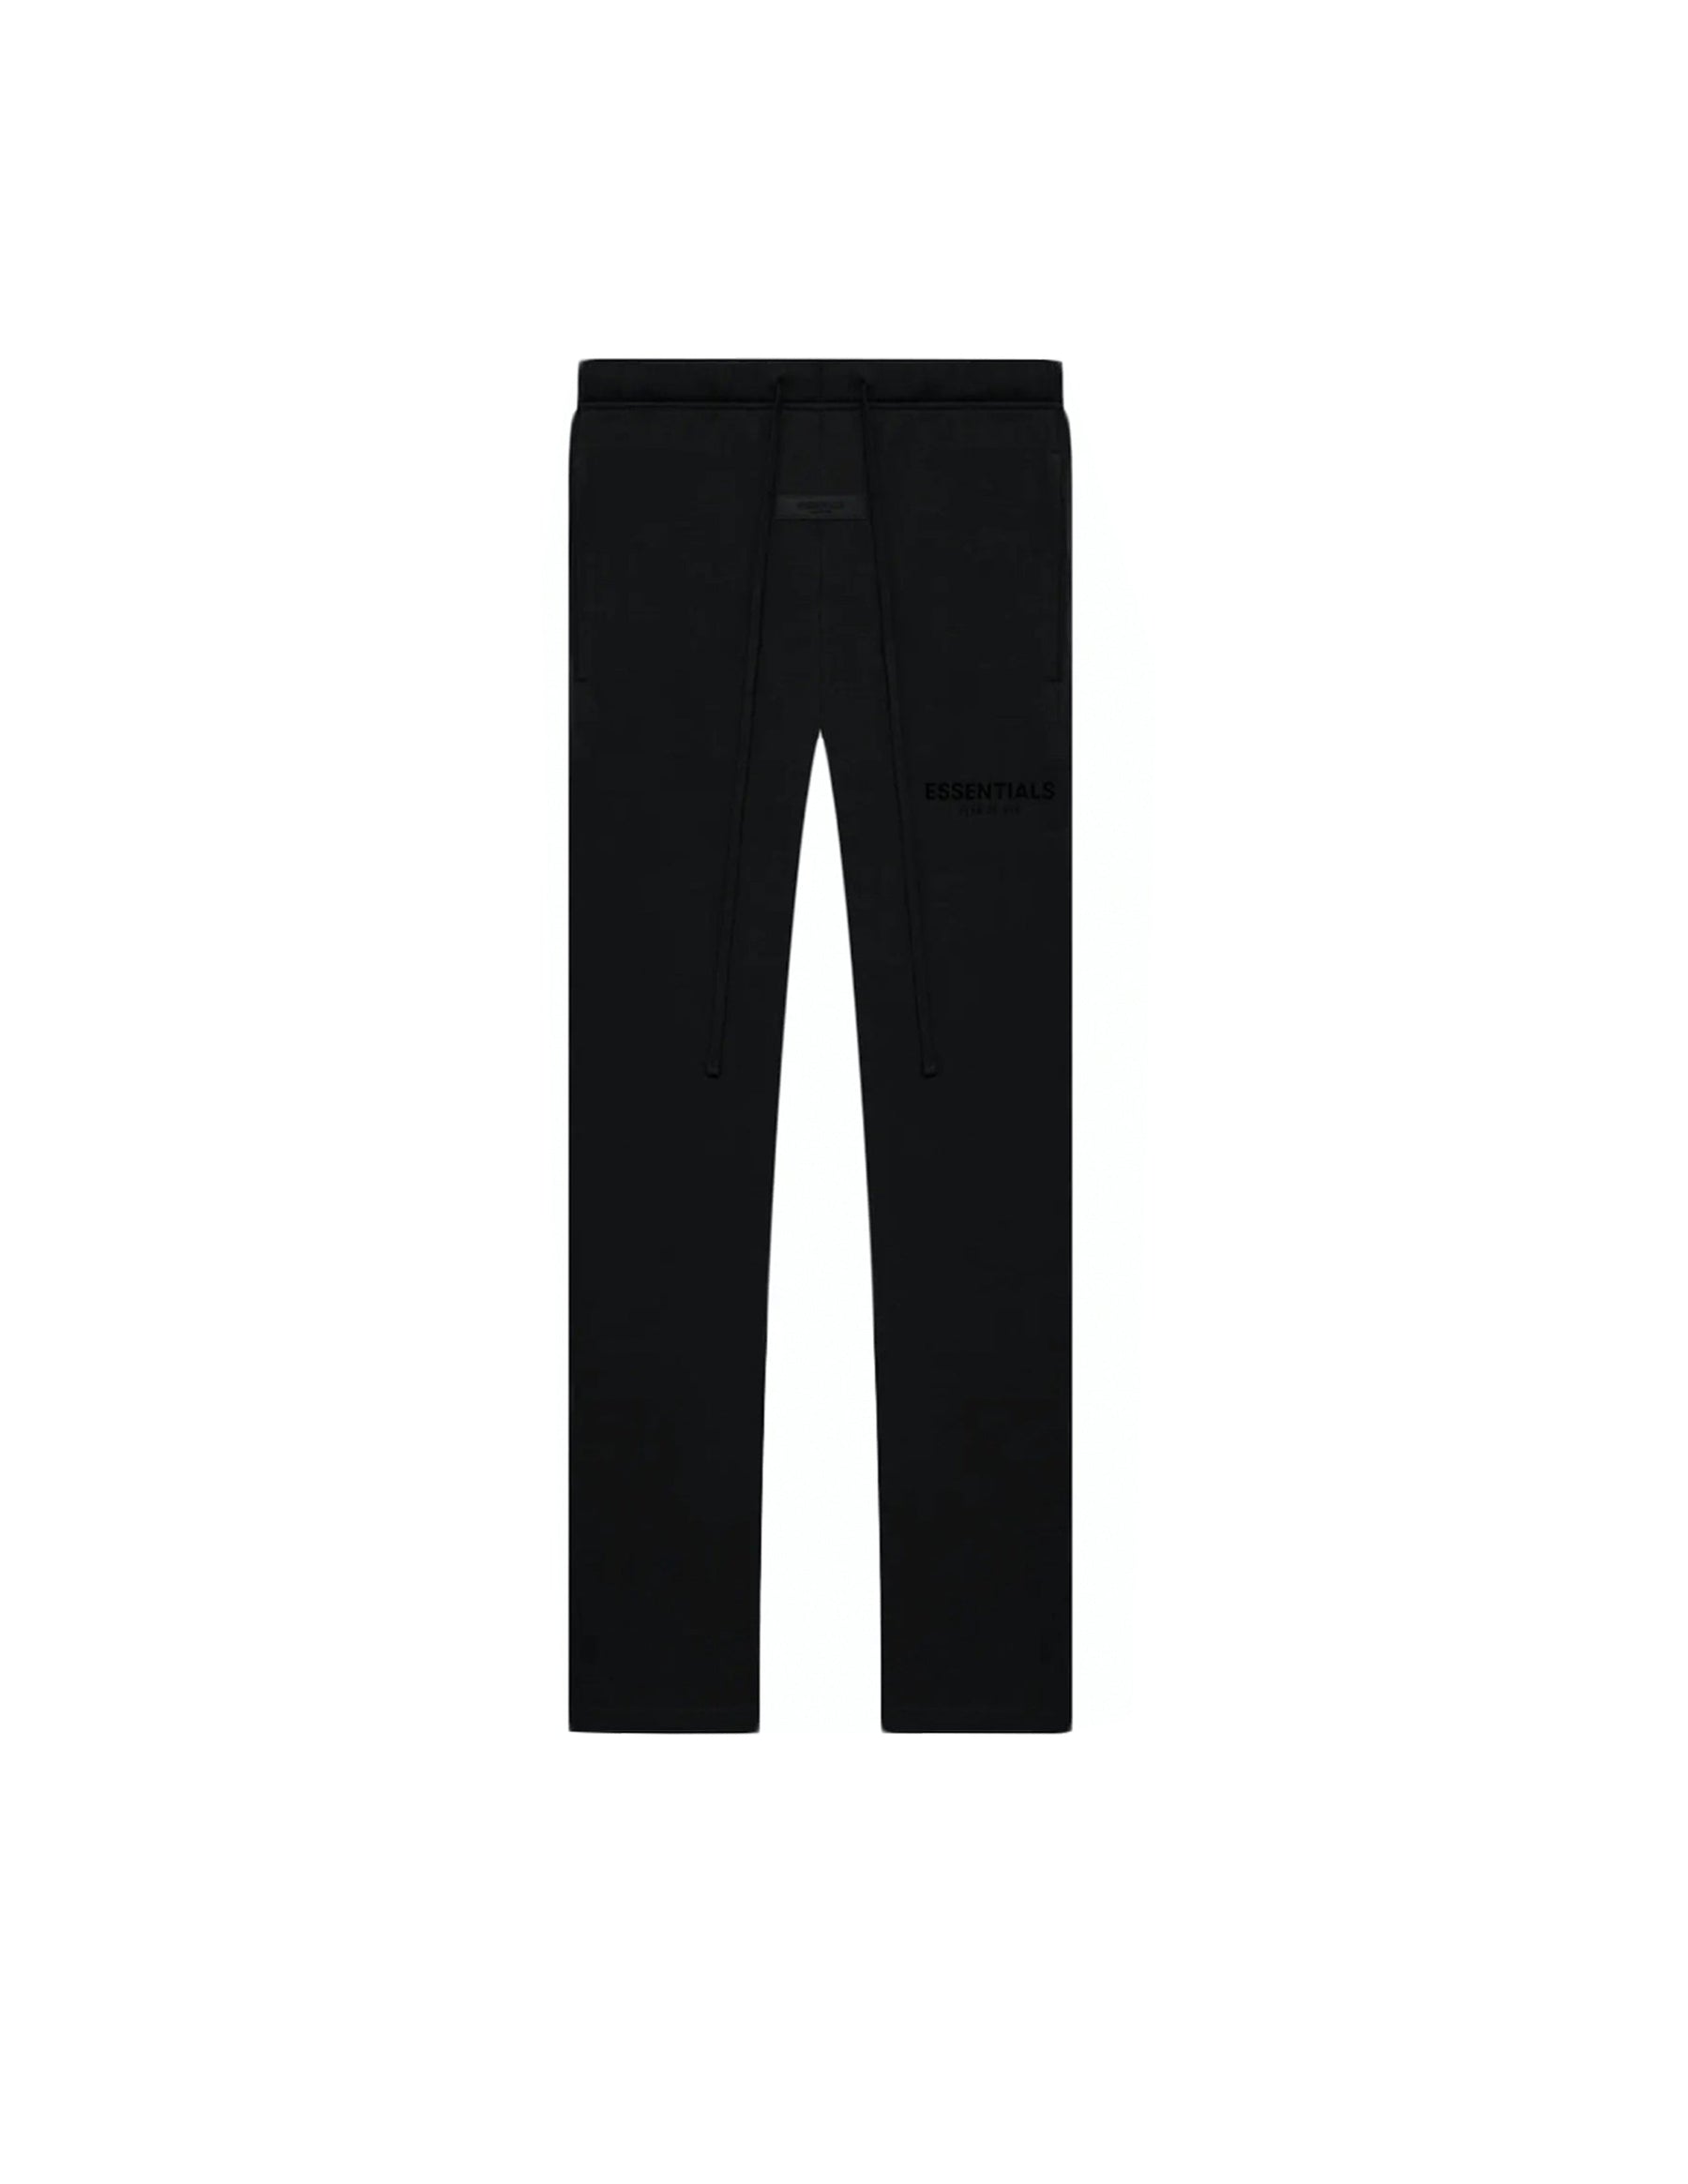 Fear Of God Essentials "Stretch Limo" Relaxed Sweatpants